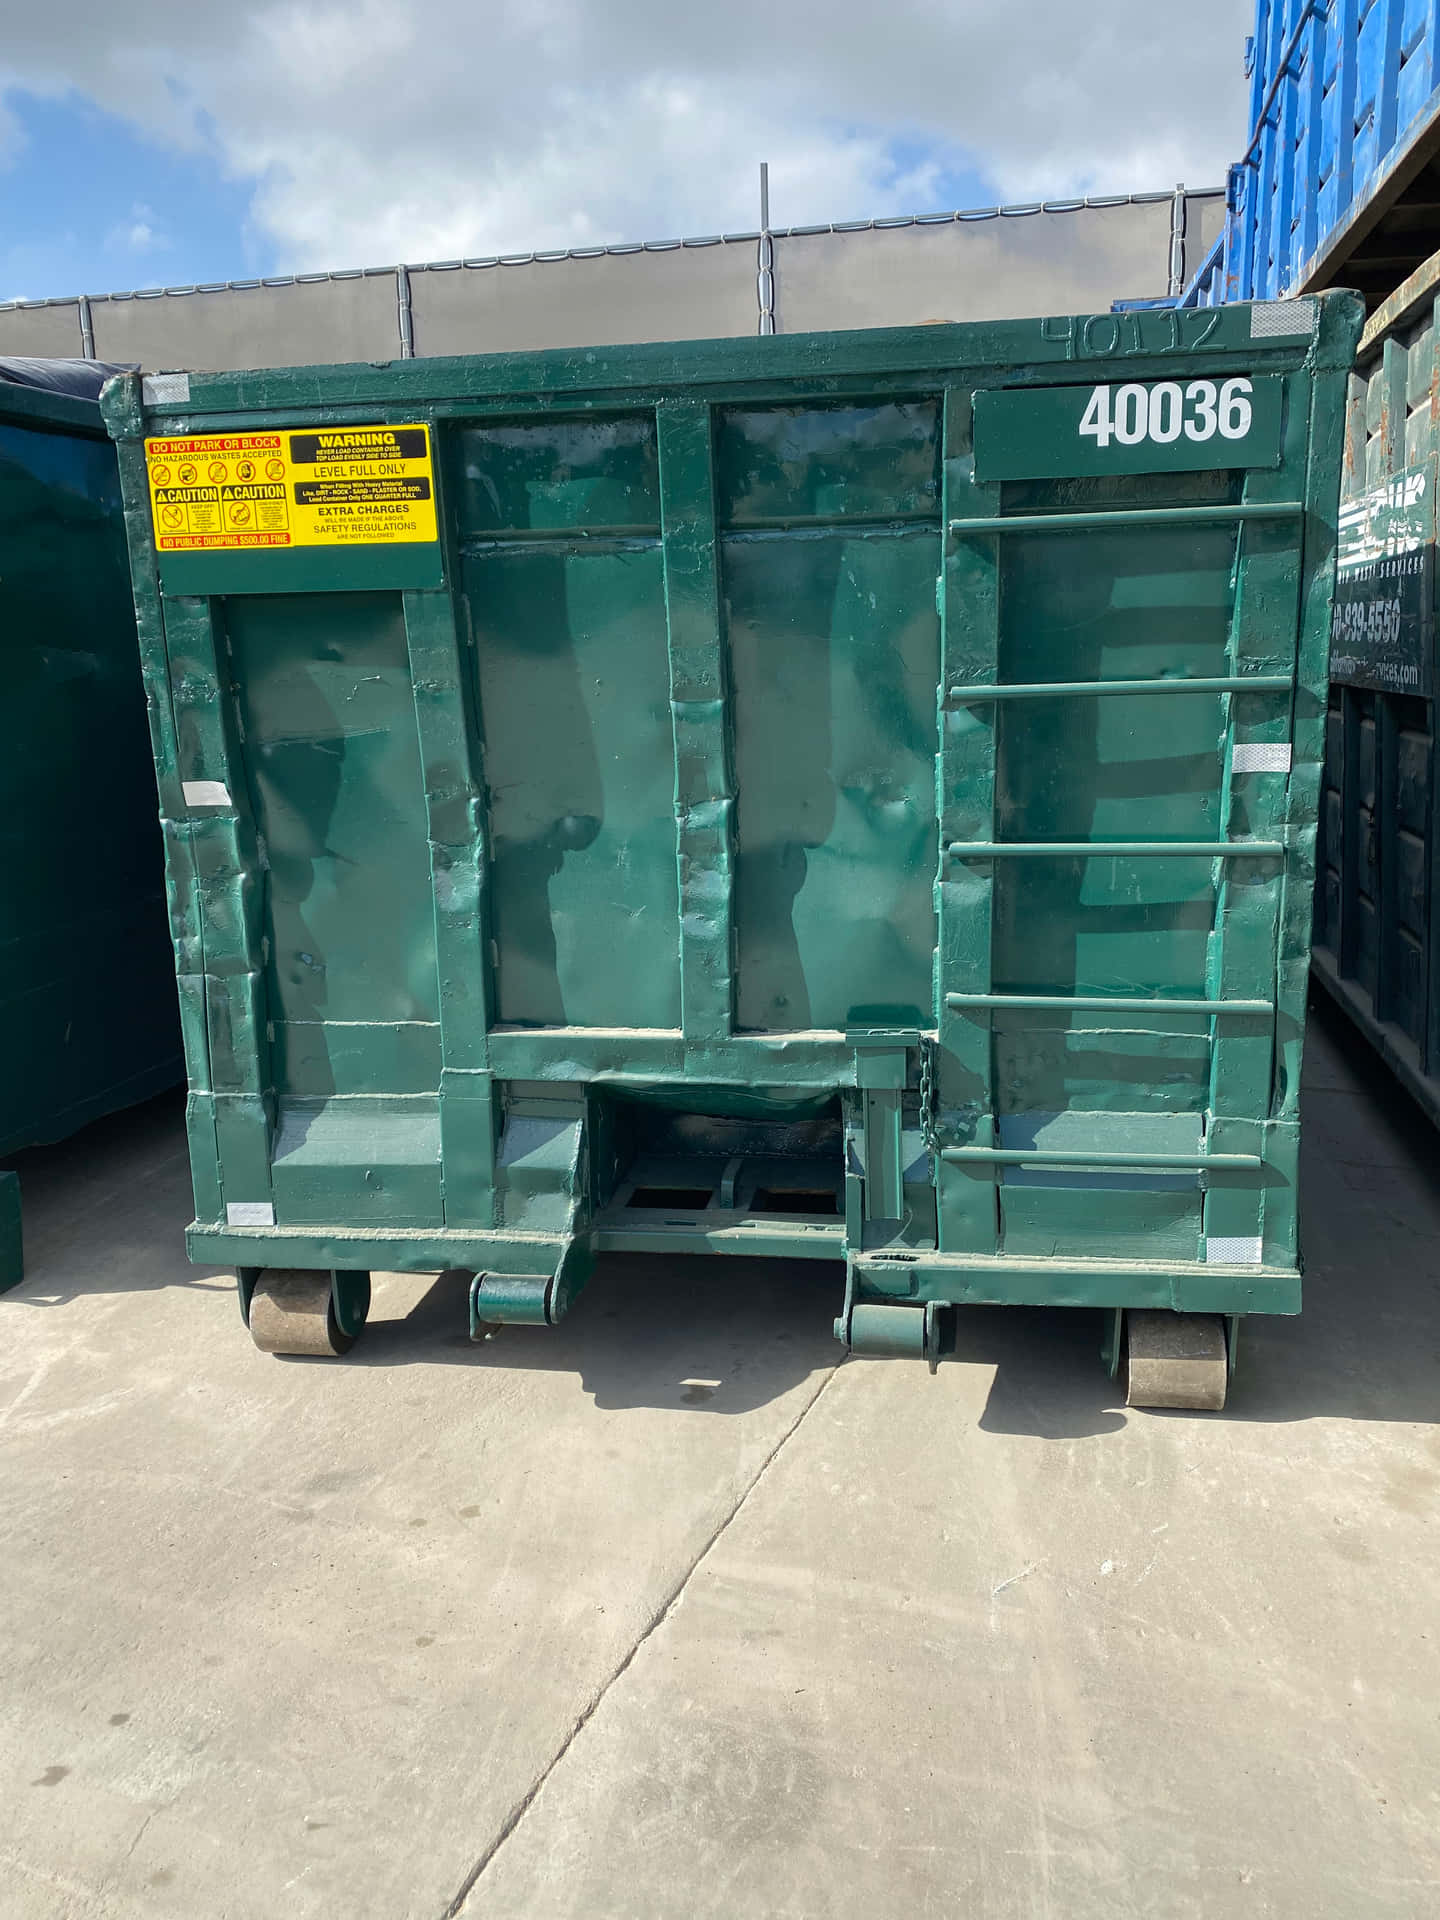 A Green Container Sitting In A Parking Lot